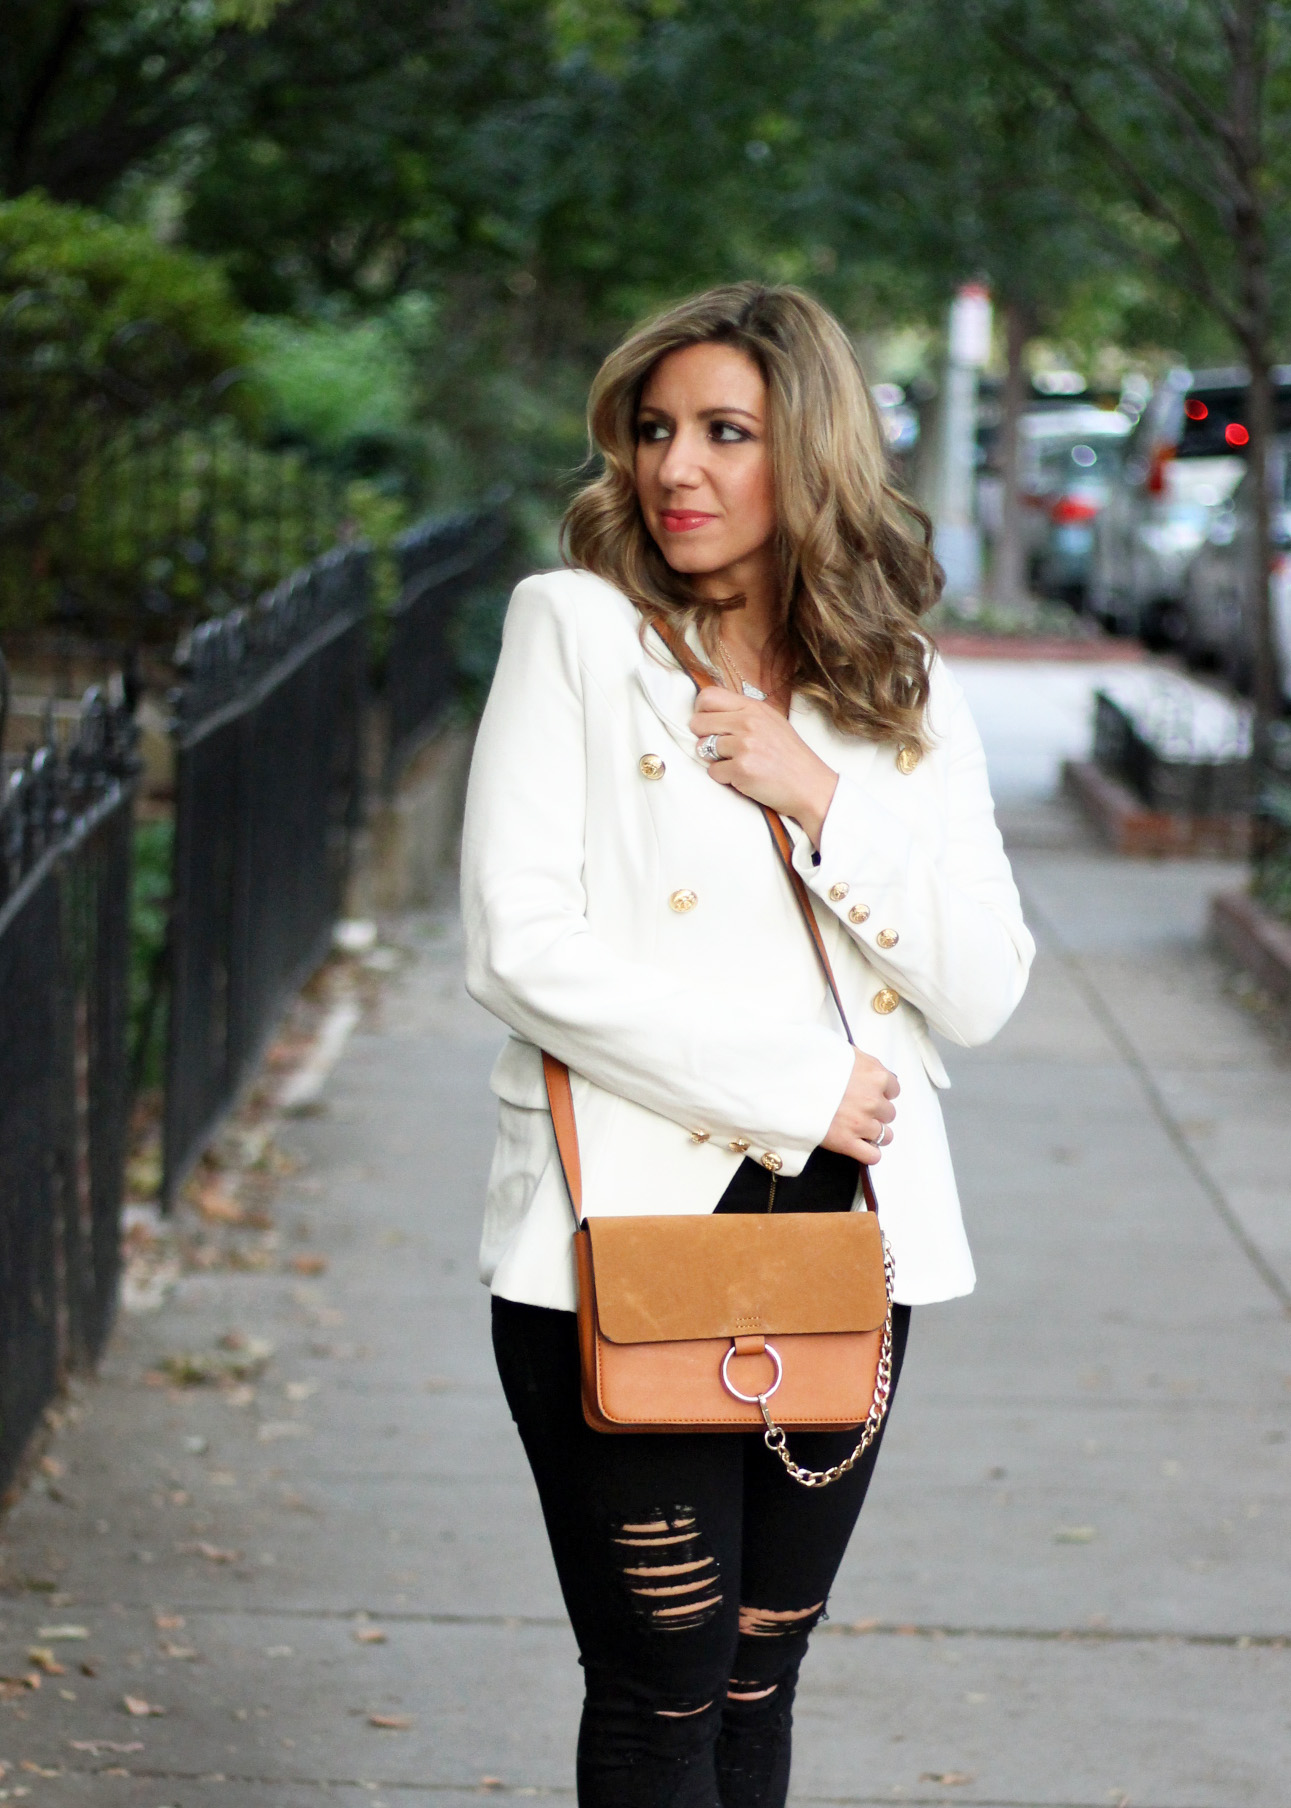 White Blazer for Date Night and Zaful Accessories